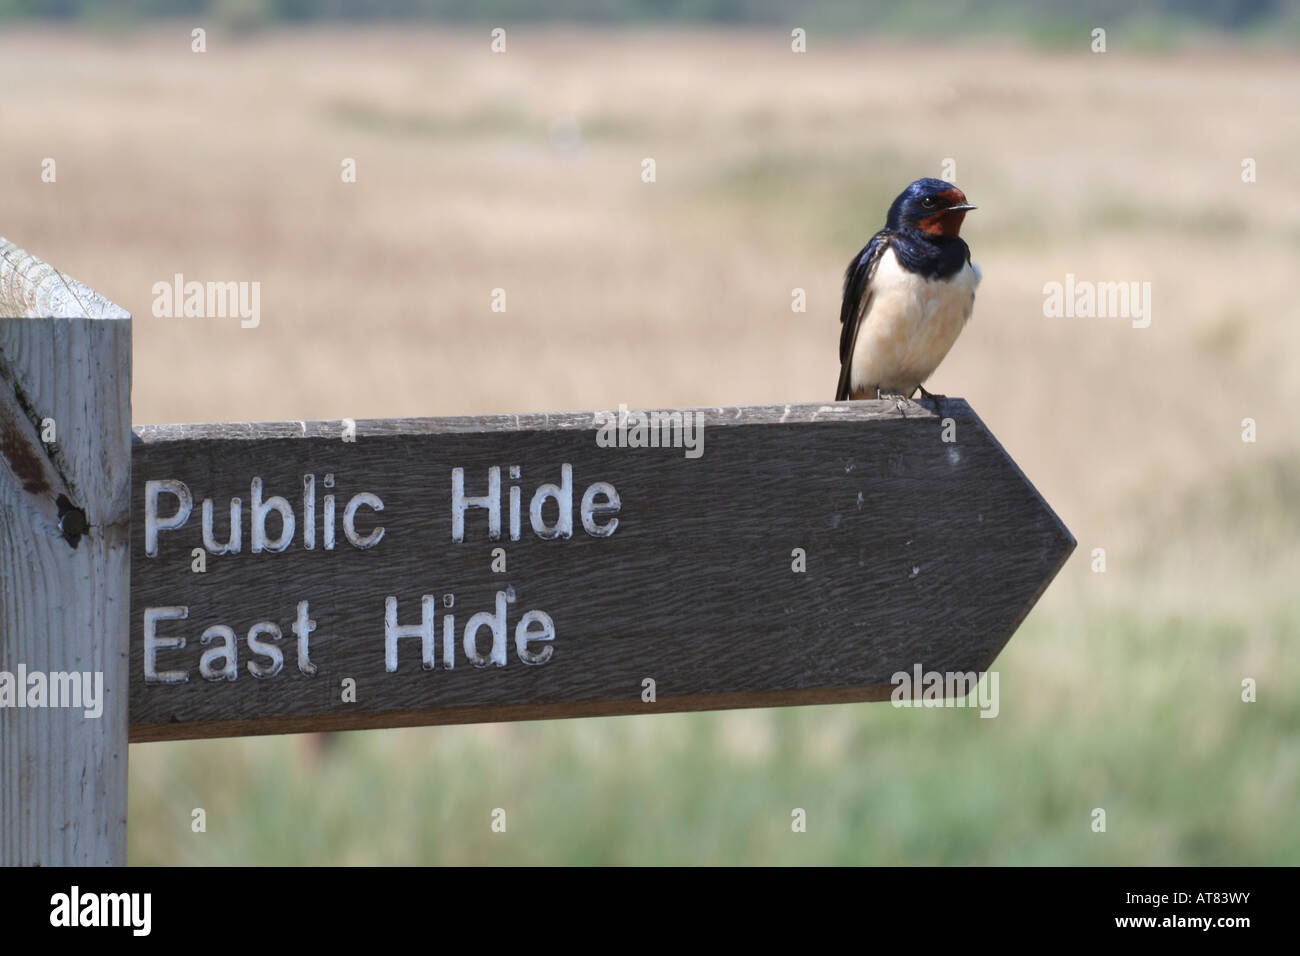 Male Swallow perched on directional sign to Bird Hides on a nature reserve Stock Photo